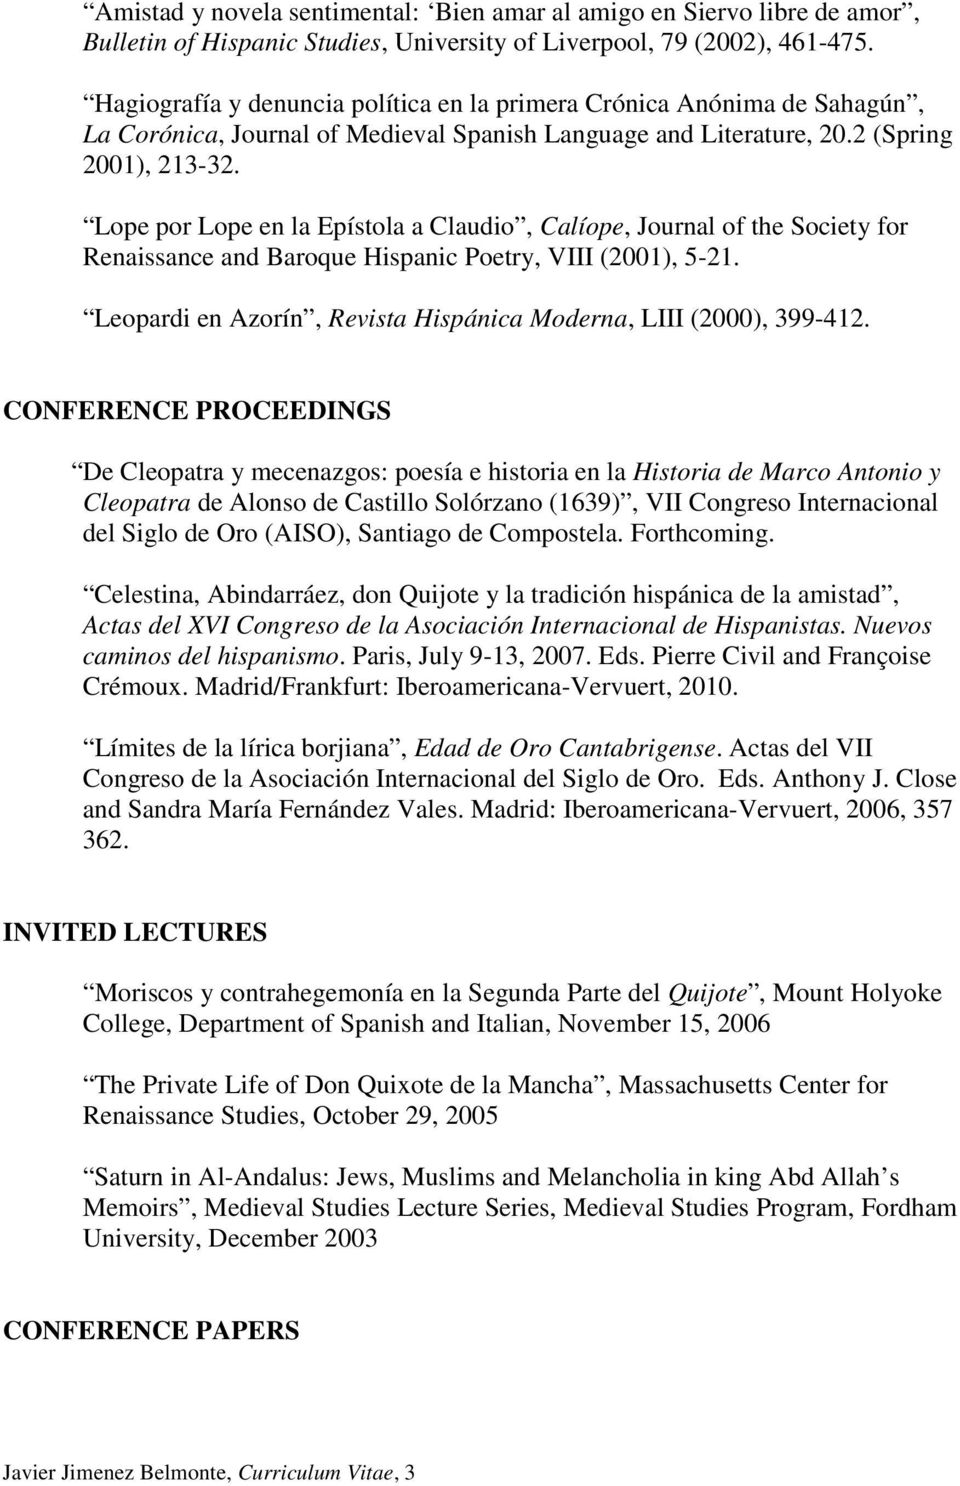 Lope por Lope en la Epístola a Claudio, Calíope, Journal of the Society for Renaissance and Baroque Hispanic Poetry, VIII (2001), 5-21.